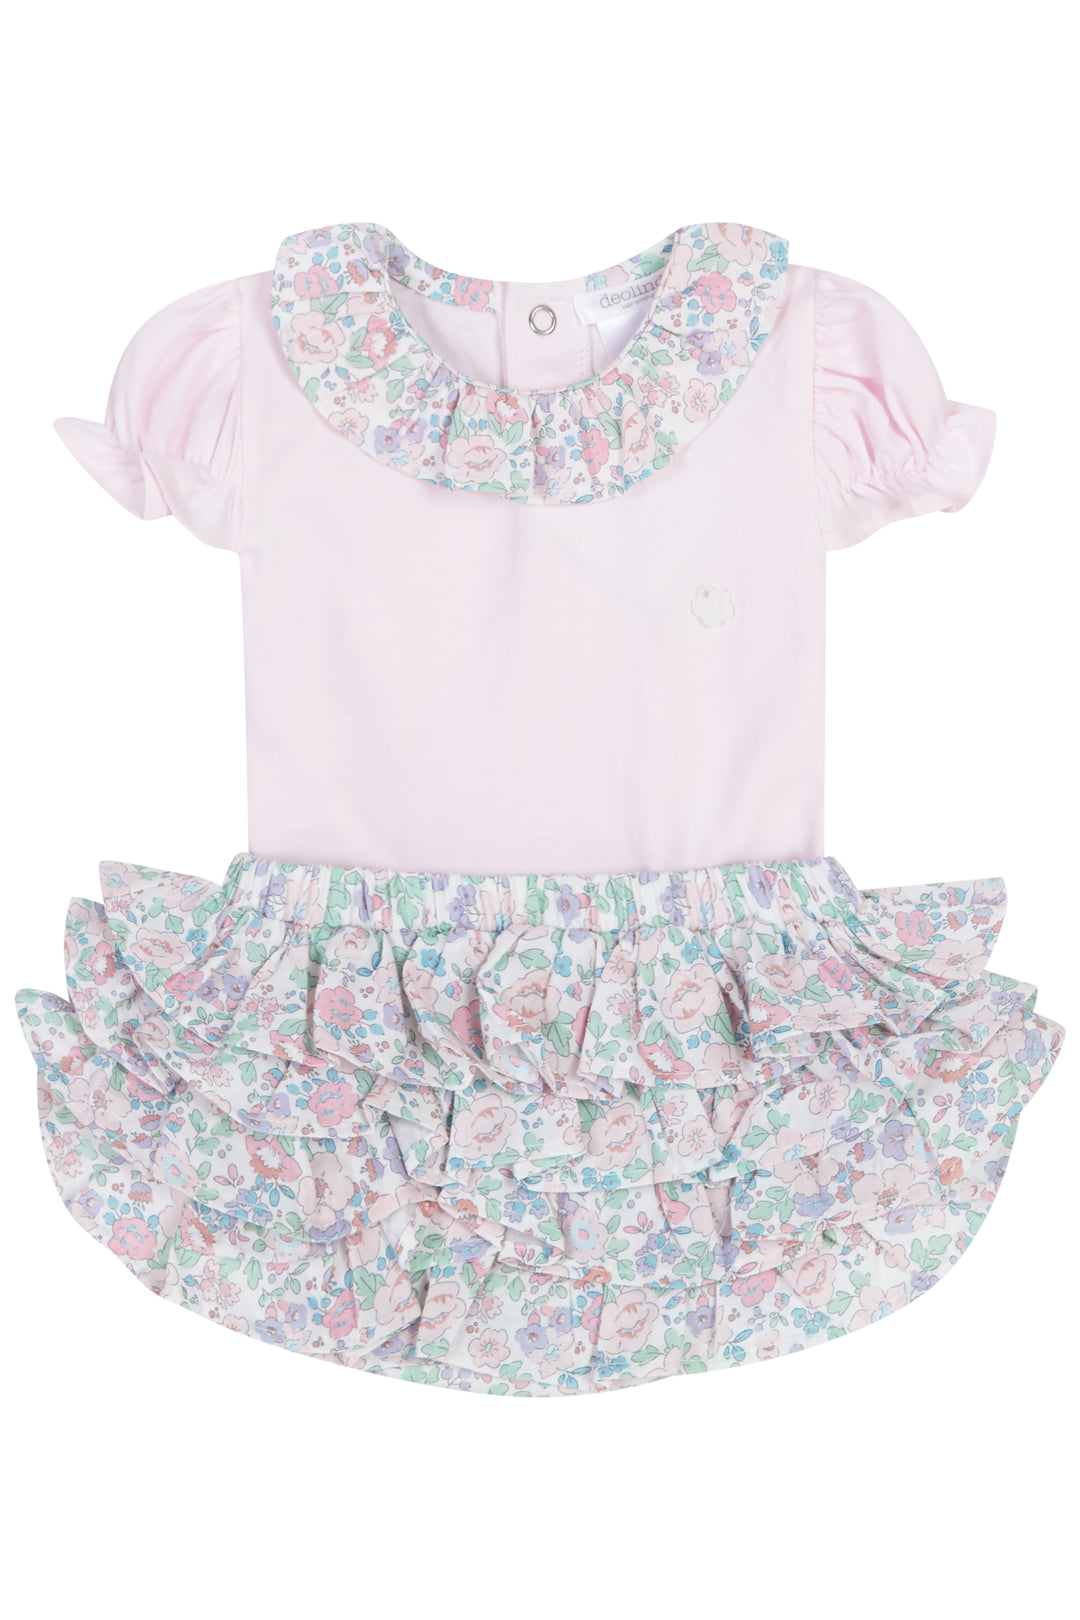 Deolinda PREORDER "Mae" Lilac Floral Blouse & Bloomers | Millie and John